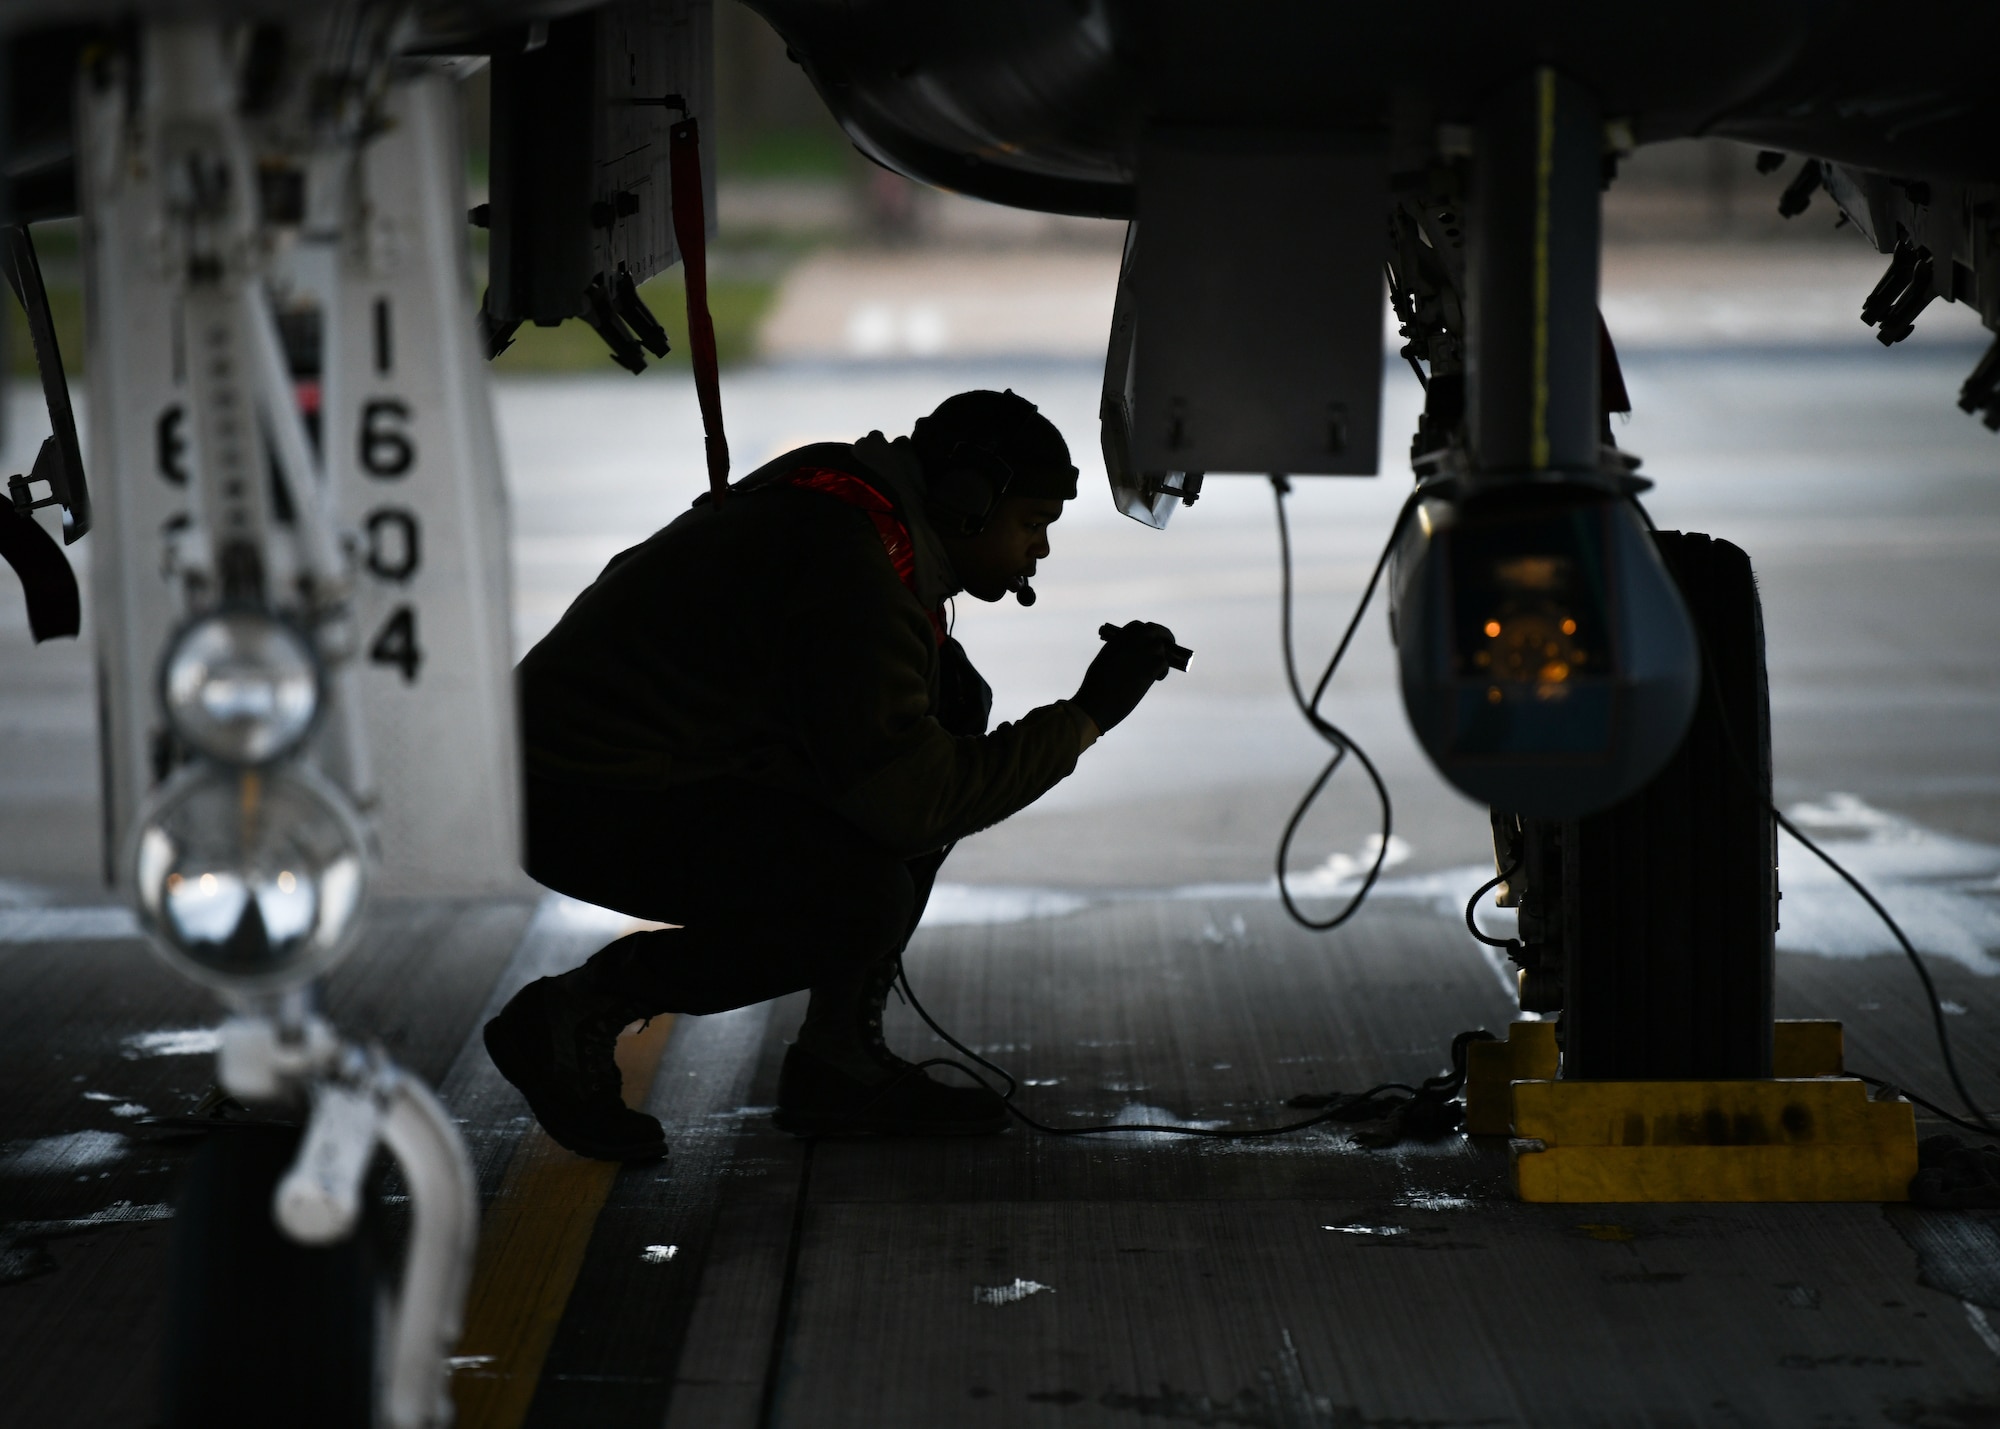 Staff Sgt. Virgil Lawson Jr., 494th Aircraft Maintenance Unit dedicated crew chief, inspects the wheels of an F-15E Strike Eagle before the first takeoffs of the new year at Royal Air Force Lakenheath, England, Jan. 5, 2021. Dedicated Crew Chiefs are responsible for managing and supervising all maintenance on their respective aircraft by coordinating with other maintenance specialties such as propulsion, hydraulics and fuels to ensure the aircraft is operational in a timely manner. (U.S. Air Force photo by Senior Airman Madeline Herzog)